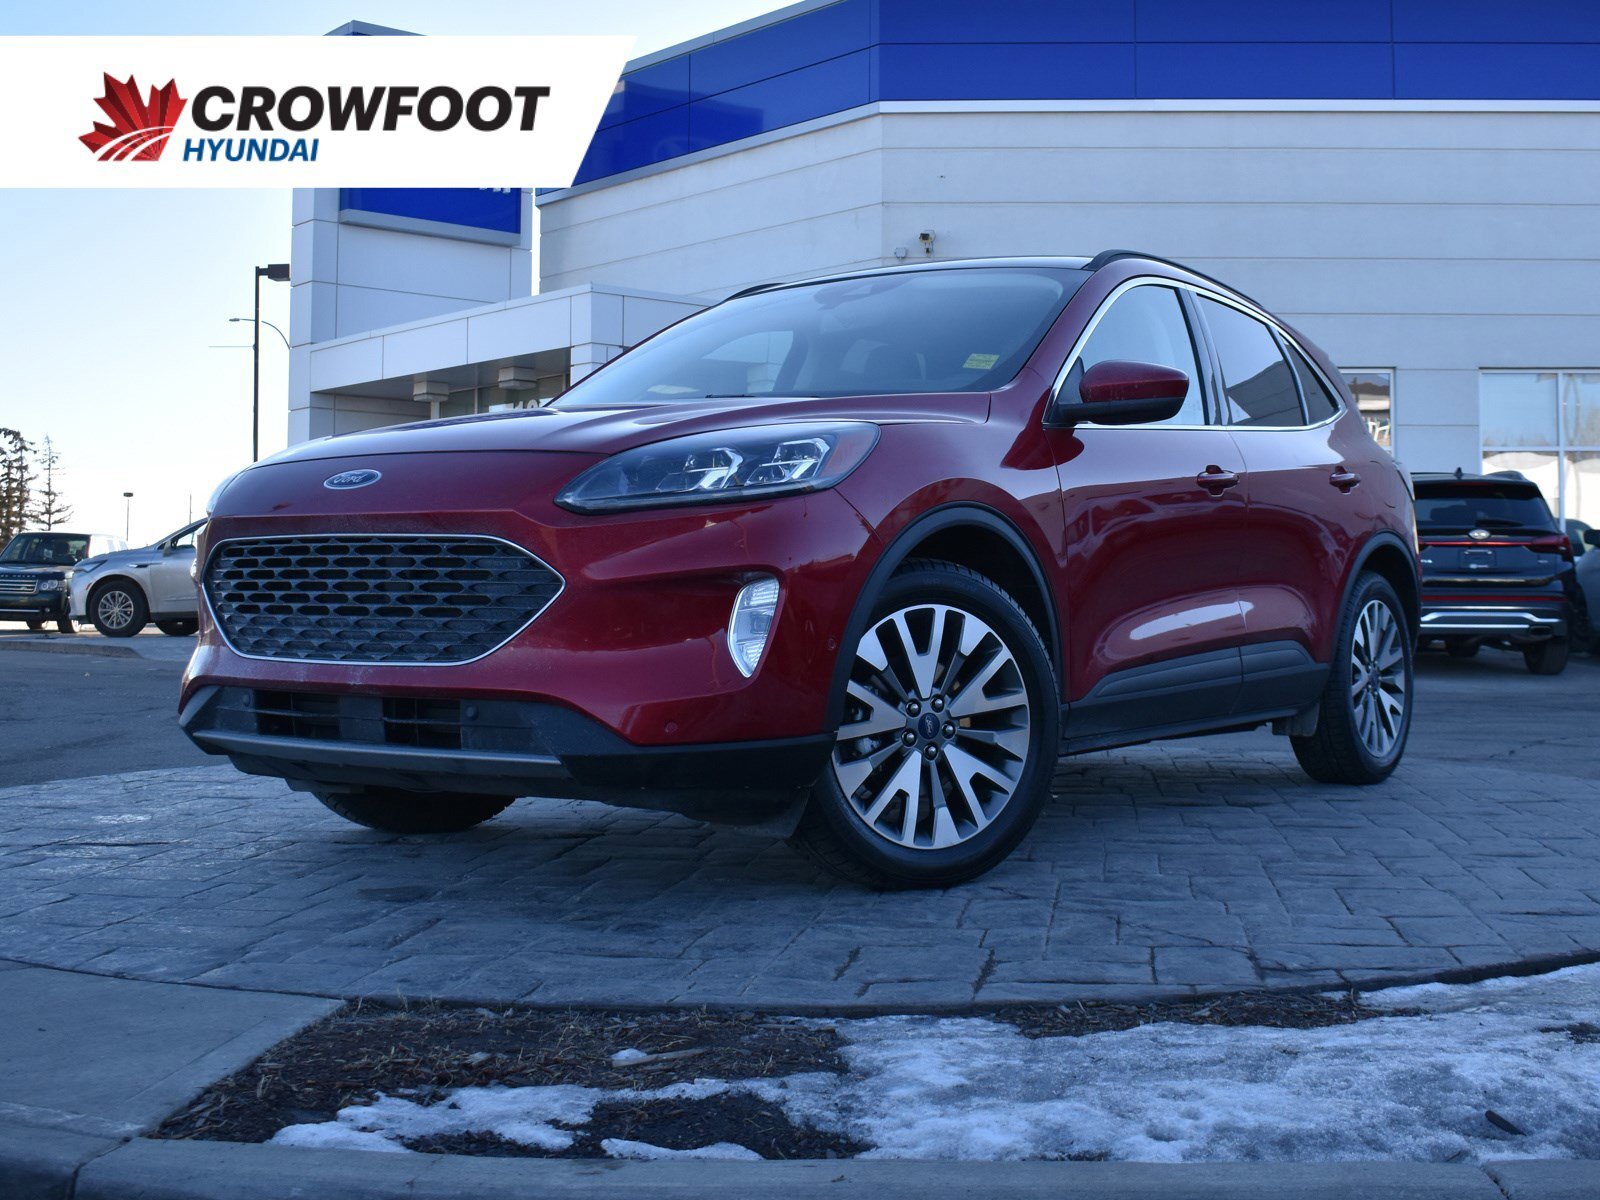 2021 Ford Escape Titanium Hybrid - AWD, One Owner, No Accidents +